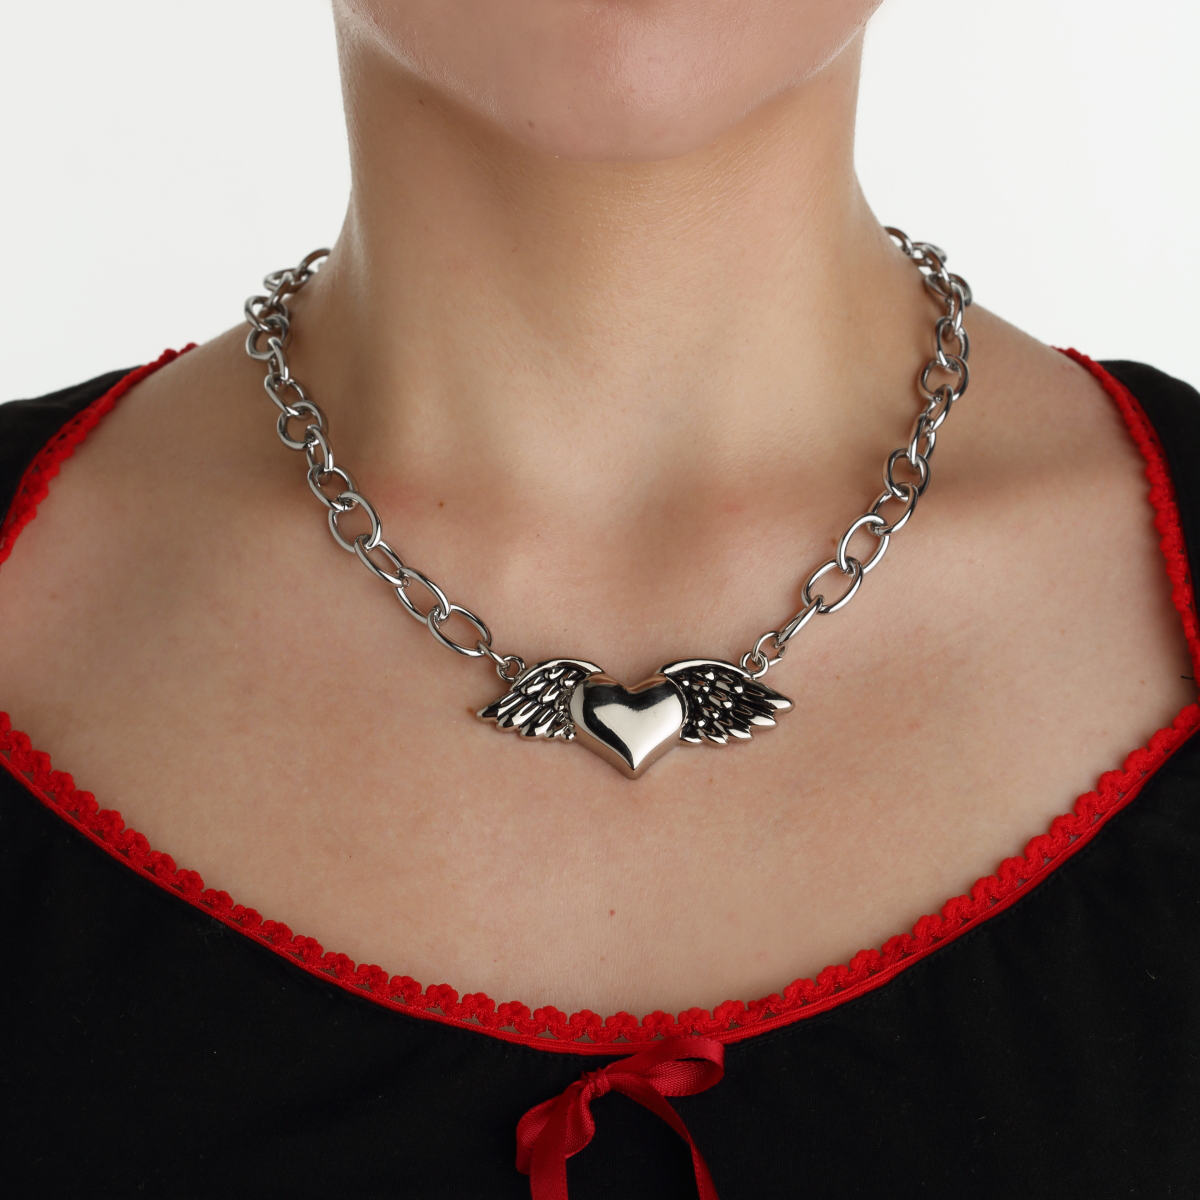 Wild at Heart Chain Necklace